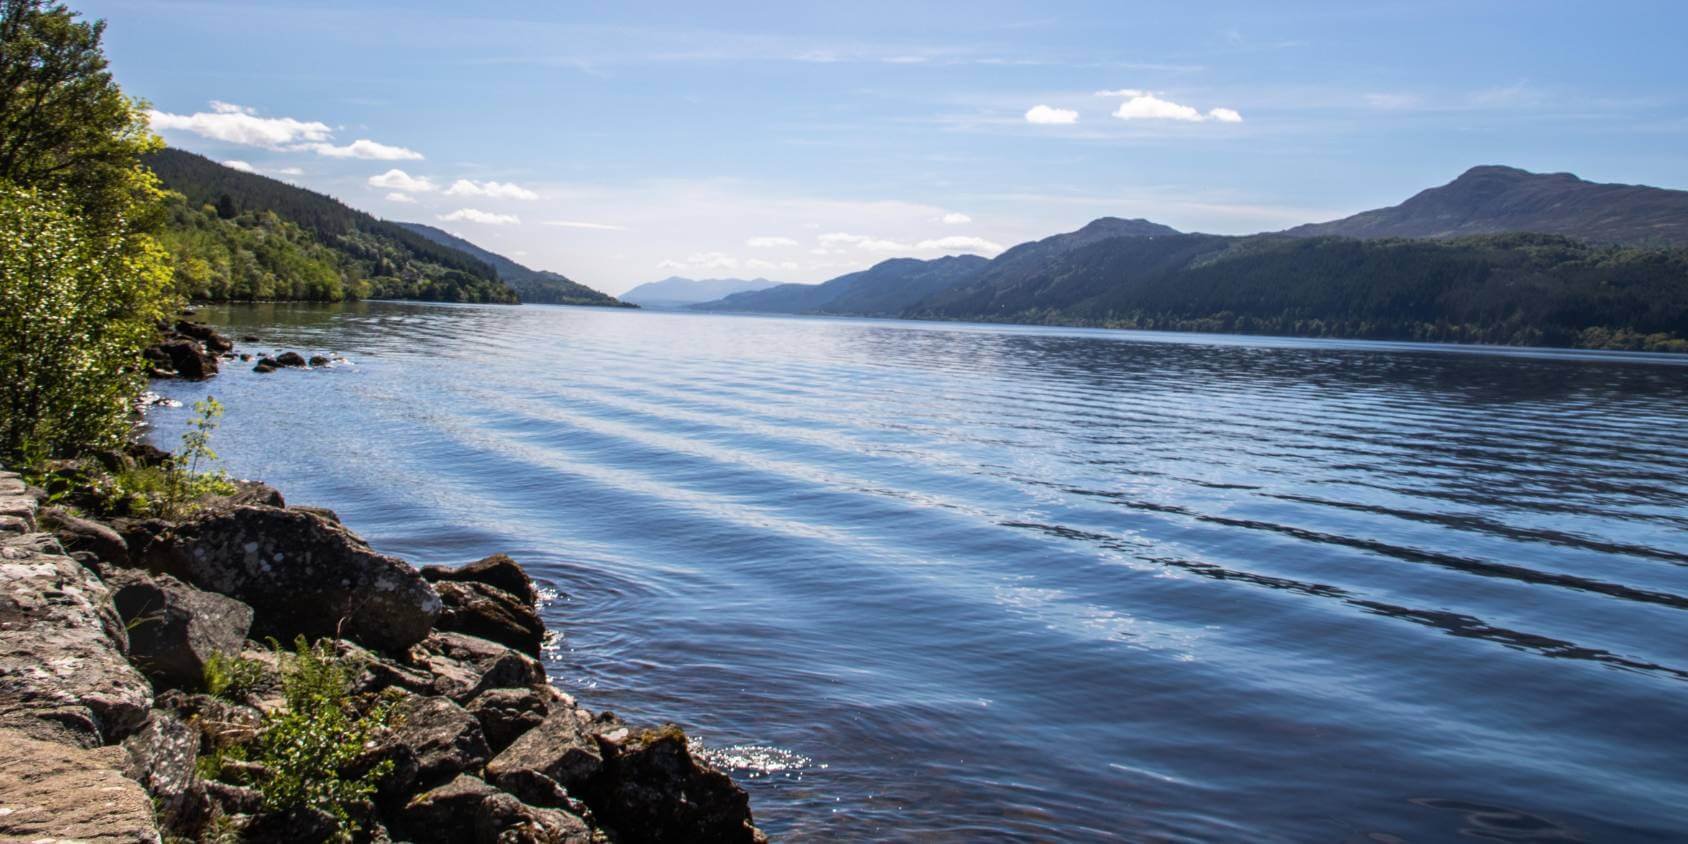 Loch Ness Cruise &amp; Walks in the Highlands, Day Tour from Edinburgh